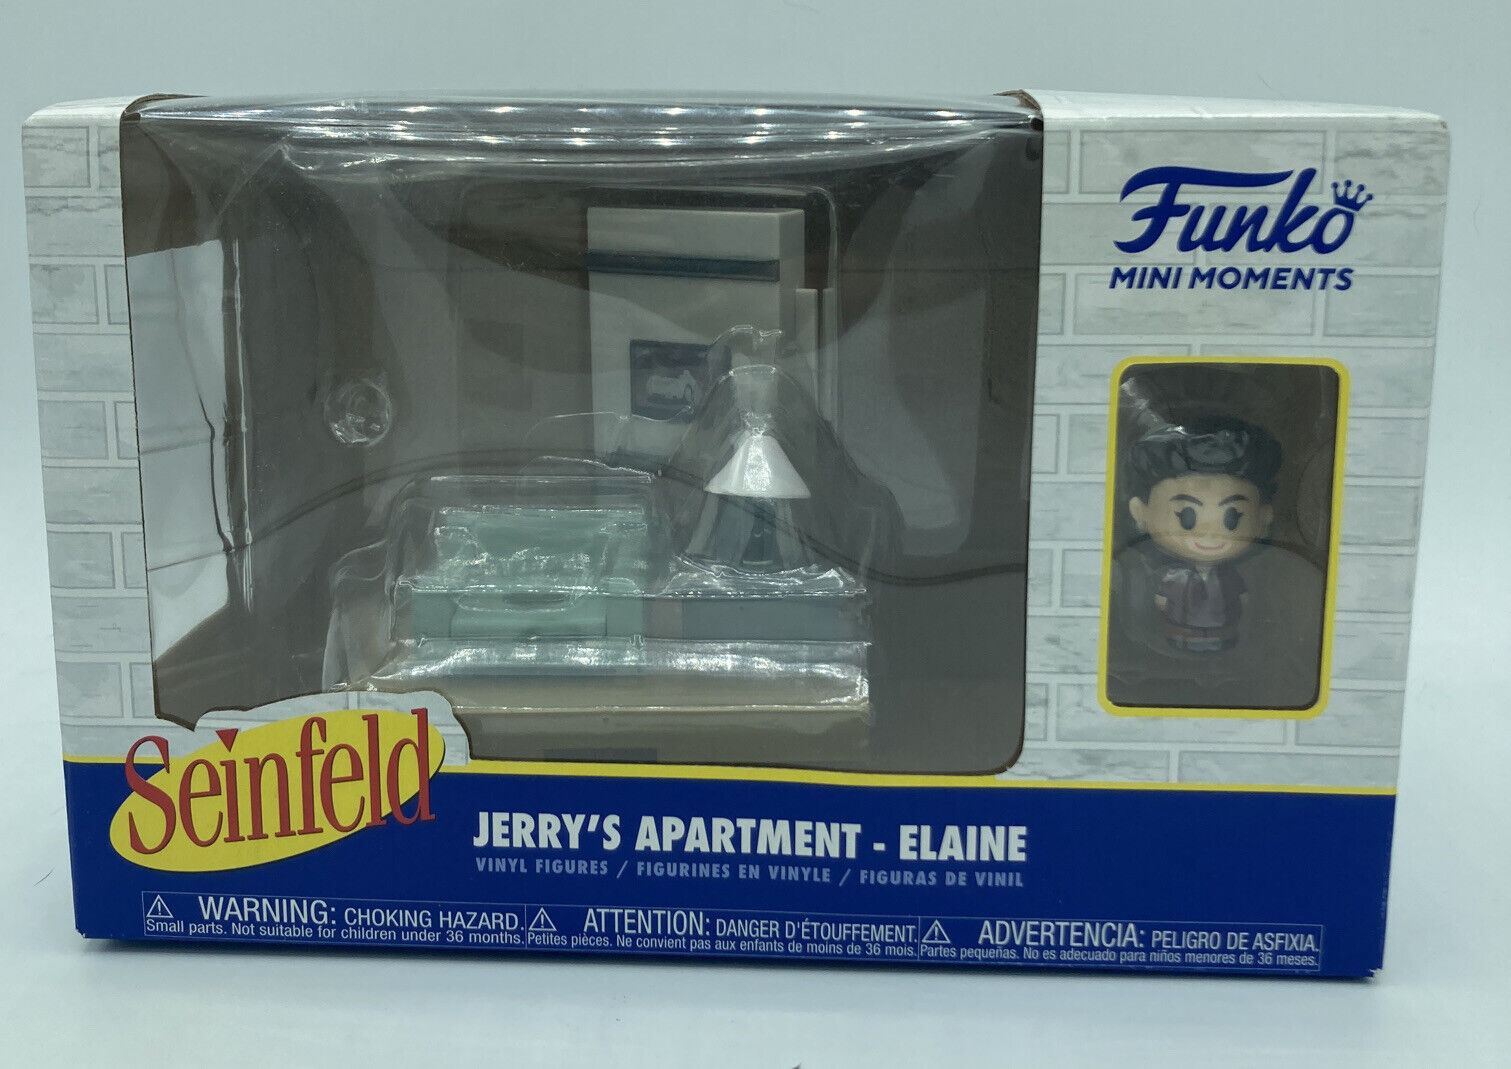 Funko Mini Moments Seinfeld Jerry\'s Apartment - Elaine Limited Edition Chase